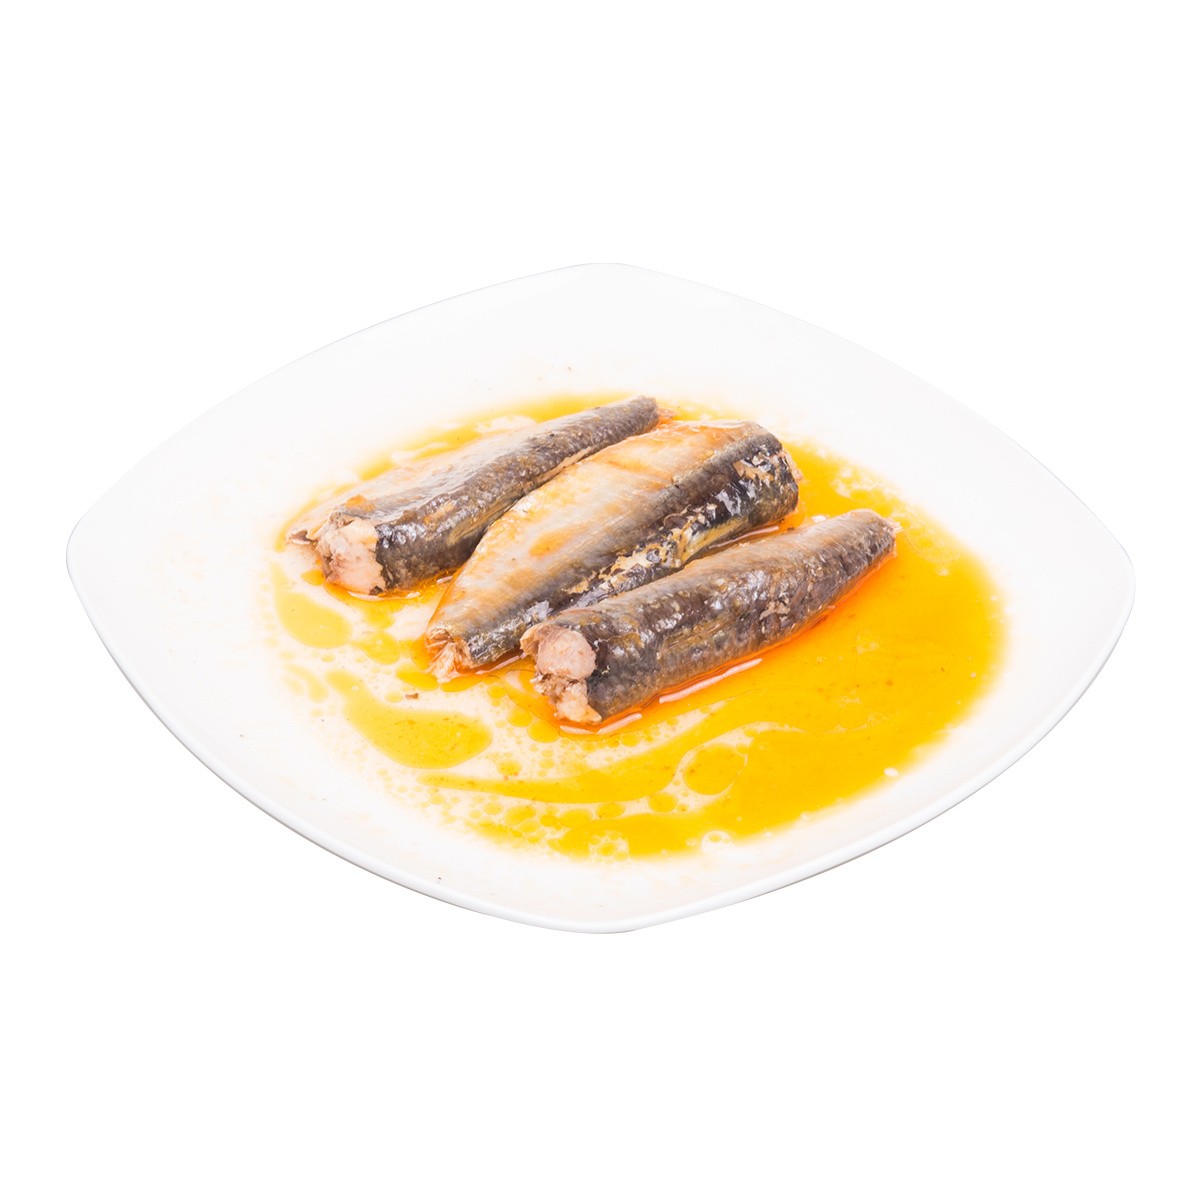 Factory Price Canned Sardine Best Quality Moroccan Sardines, 125g Sardine in Vegetable Oil/Soya Oil 125g*50tins/Carton